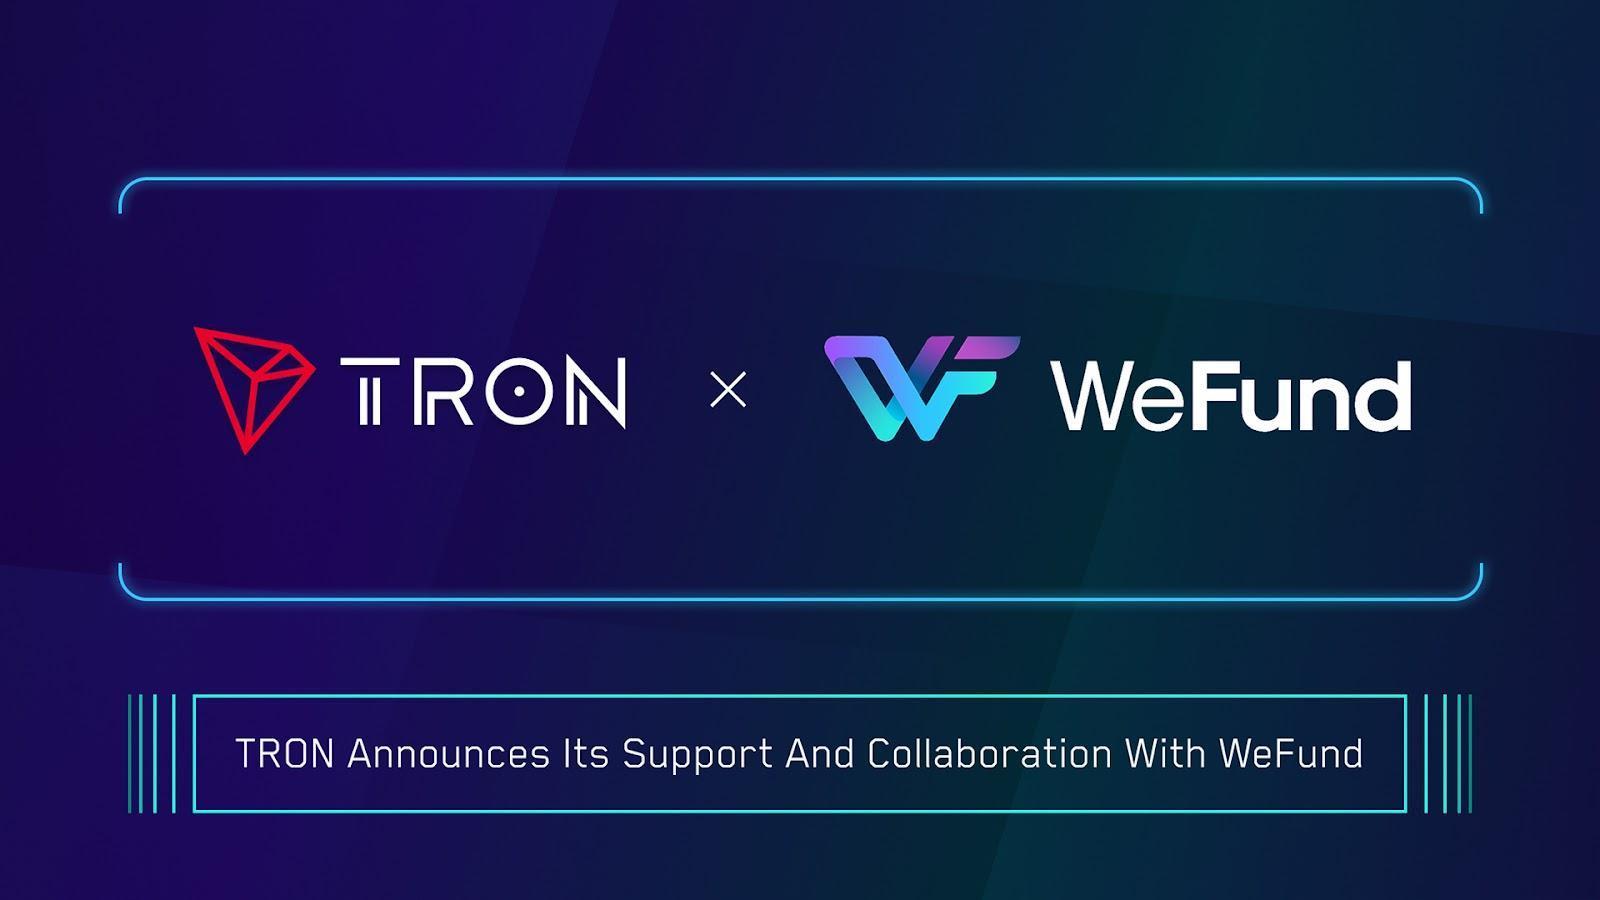 TRON Announces its Support and Collaboration with WeFund